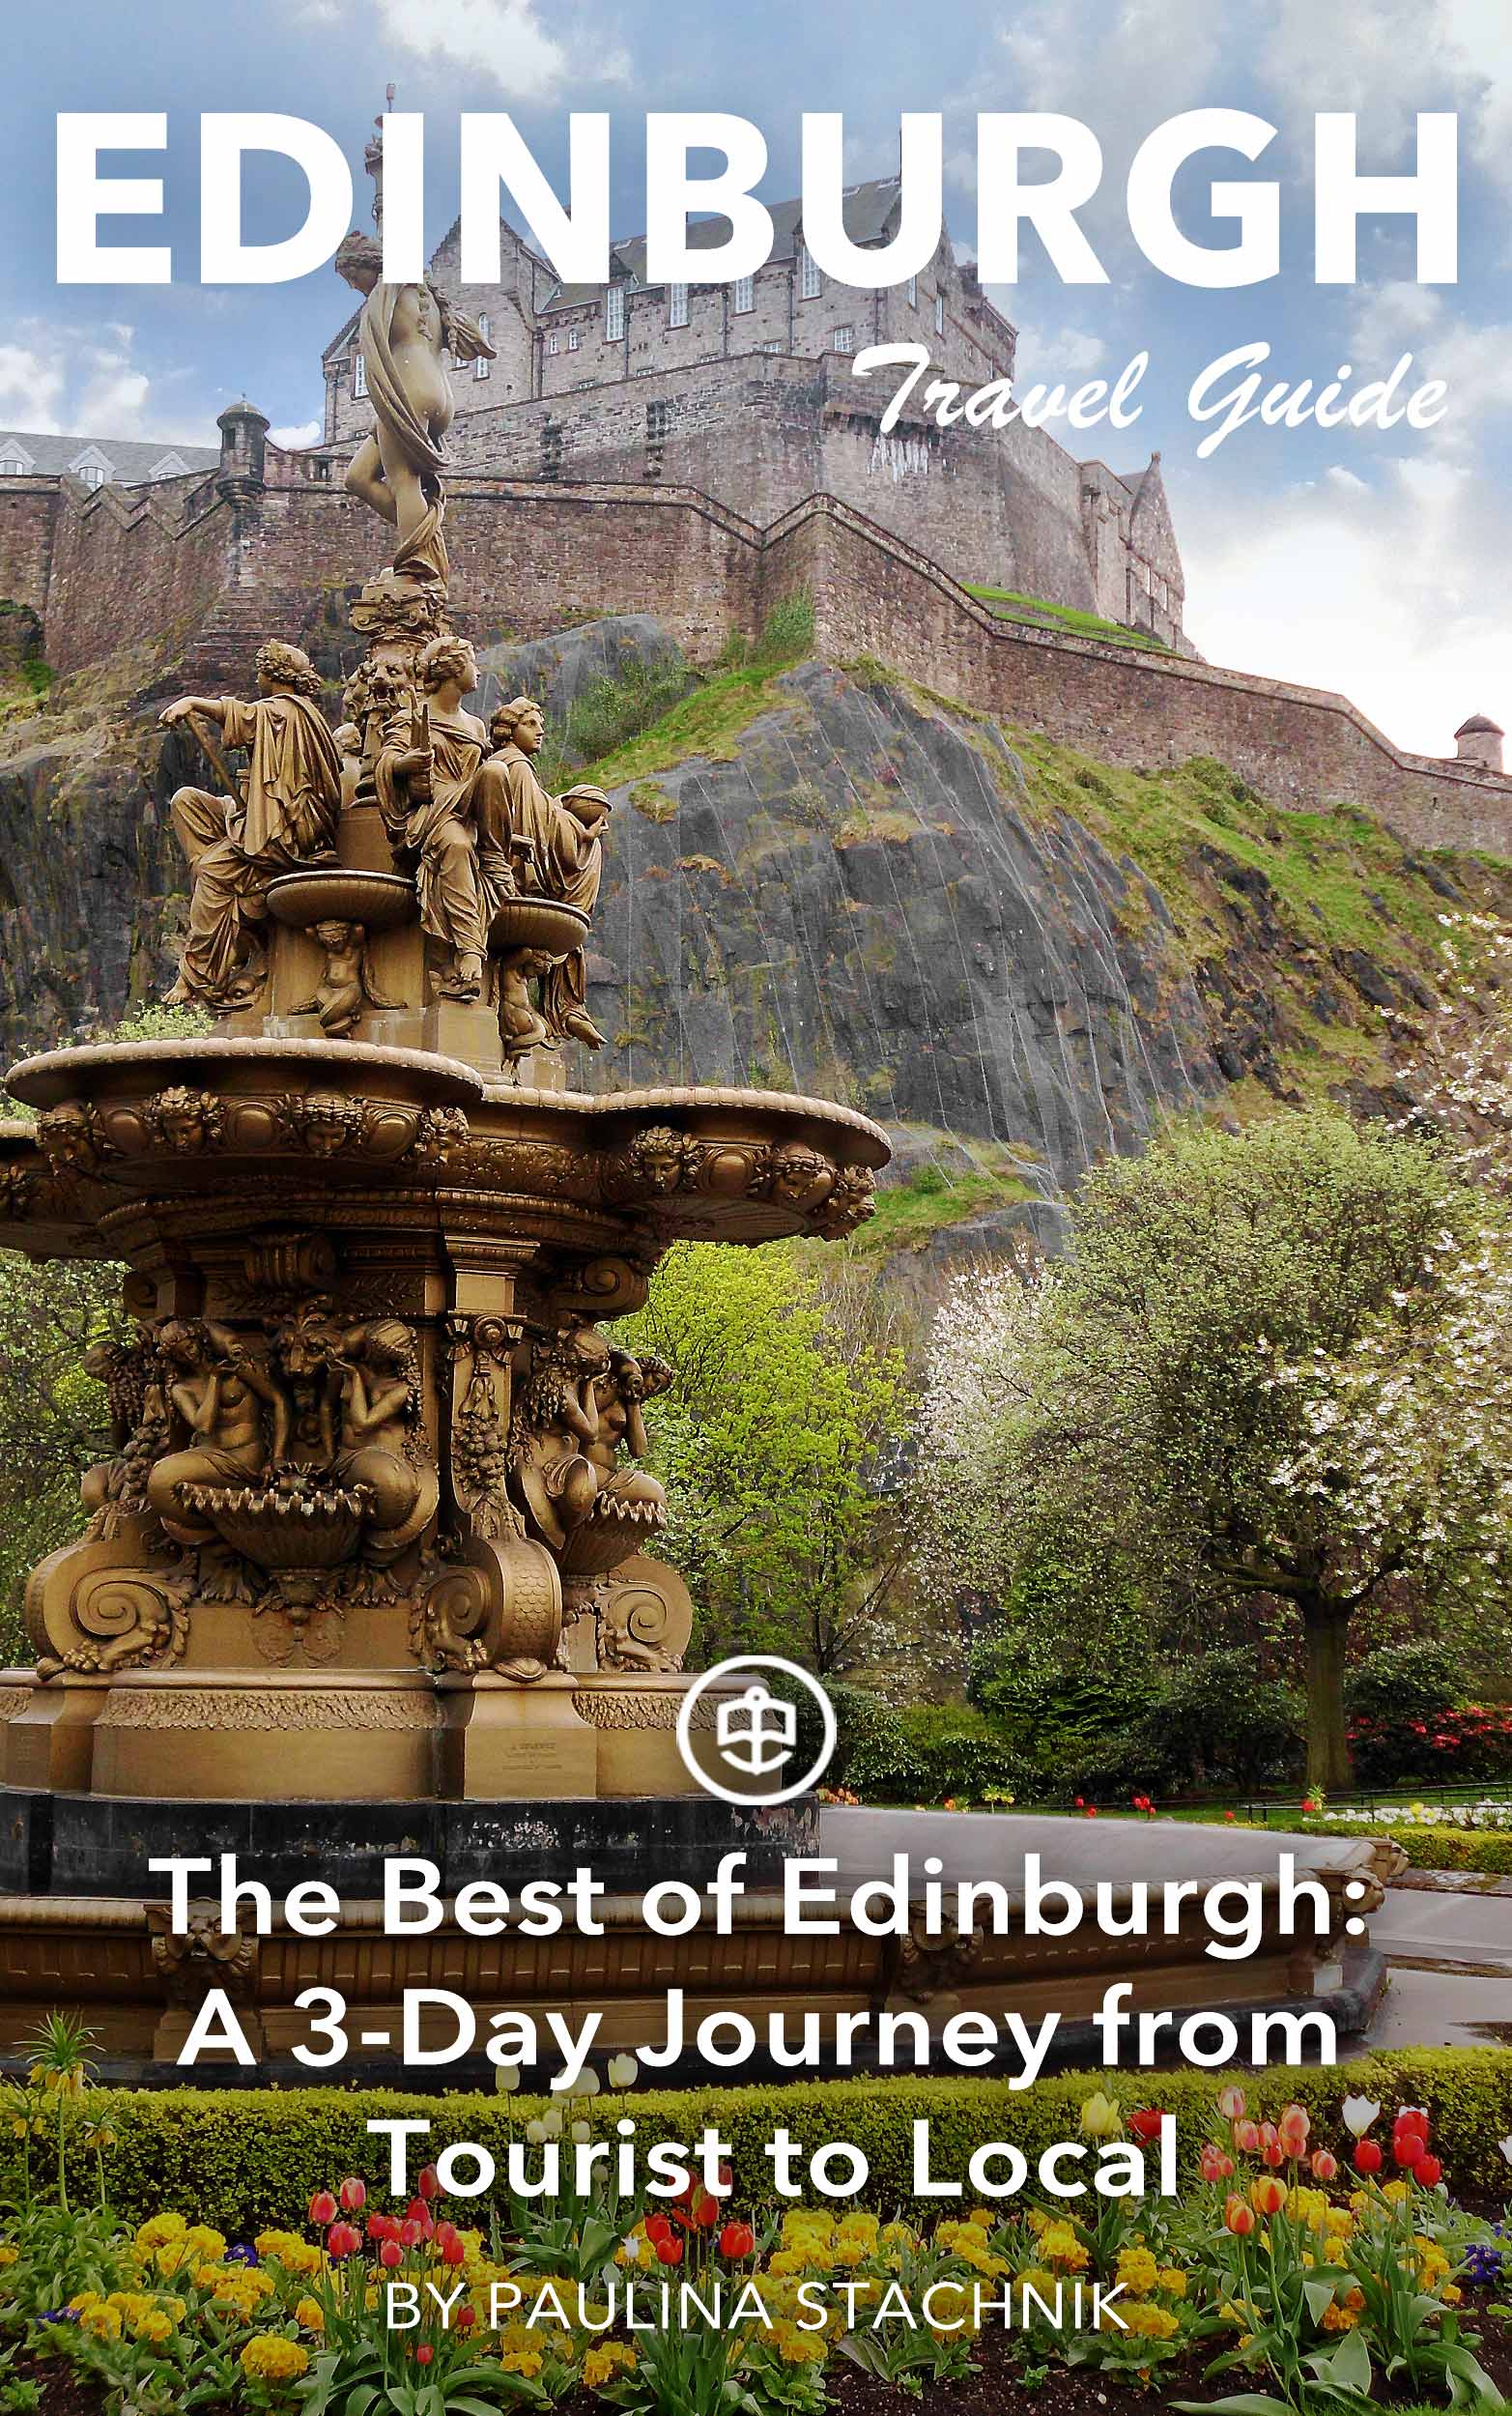 The Best of Edinburgh: A 3-Day Journey from Tourist to Local